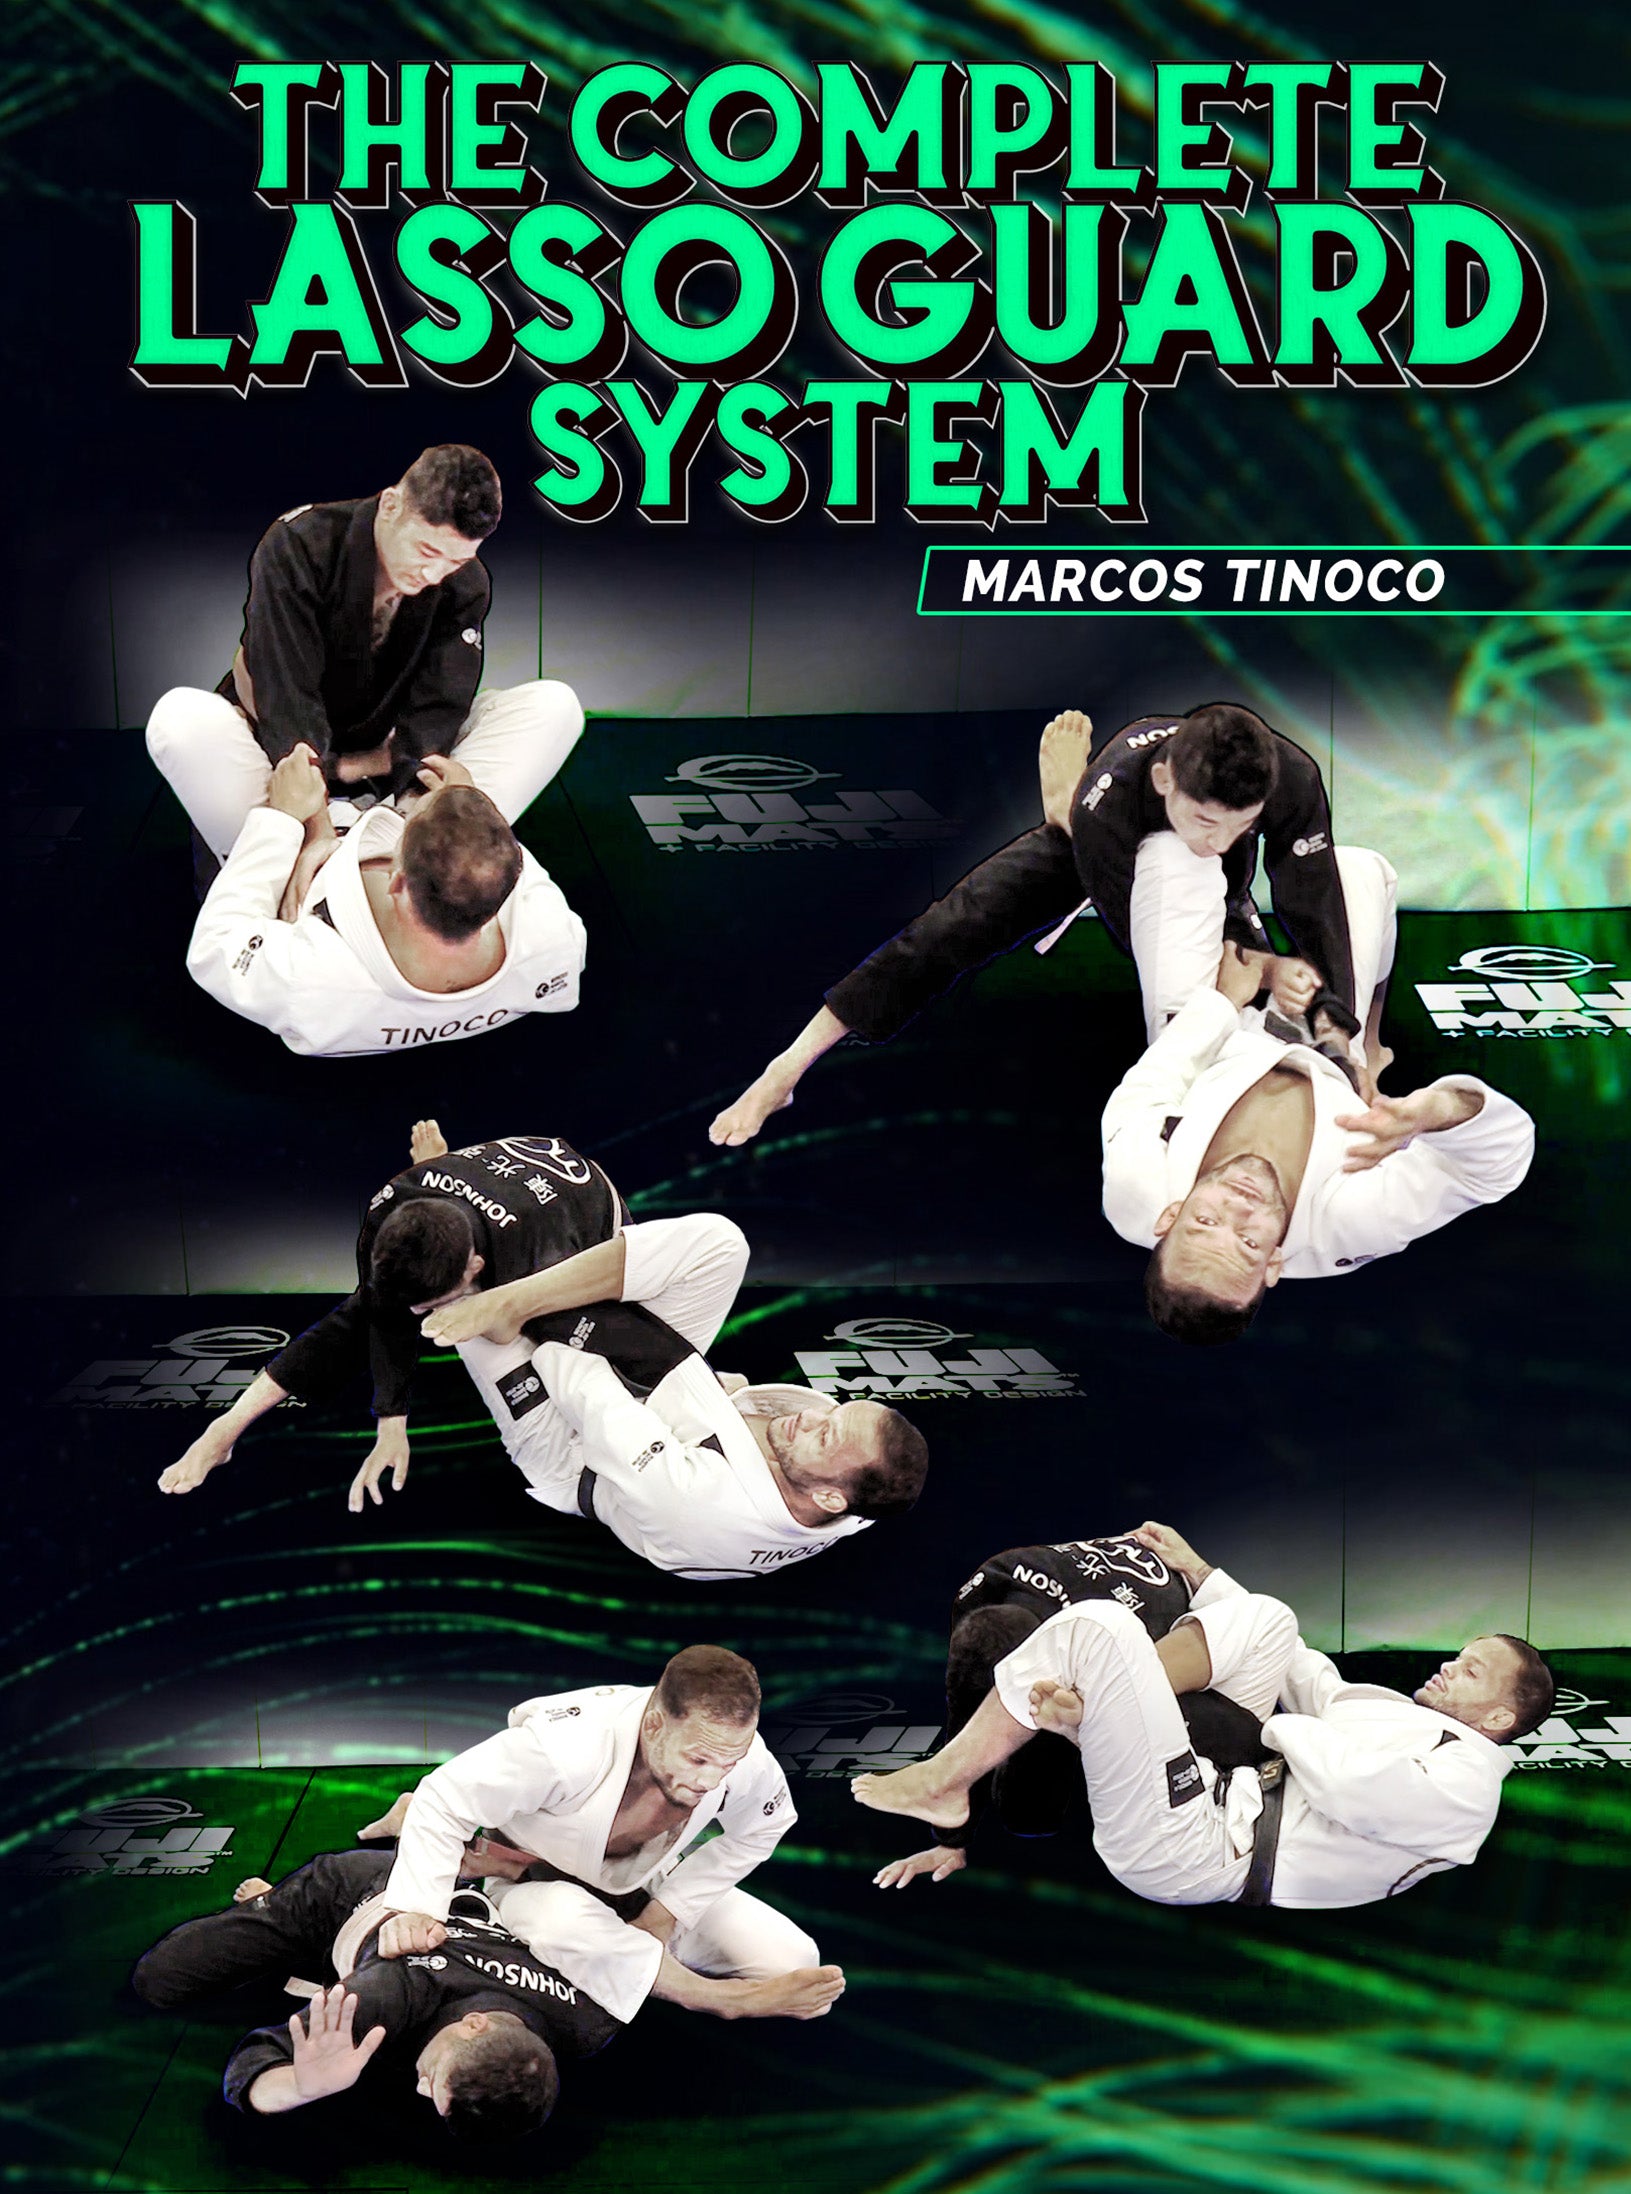 The Complete Lasso Guard System by Marcos Tinoco